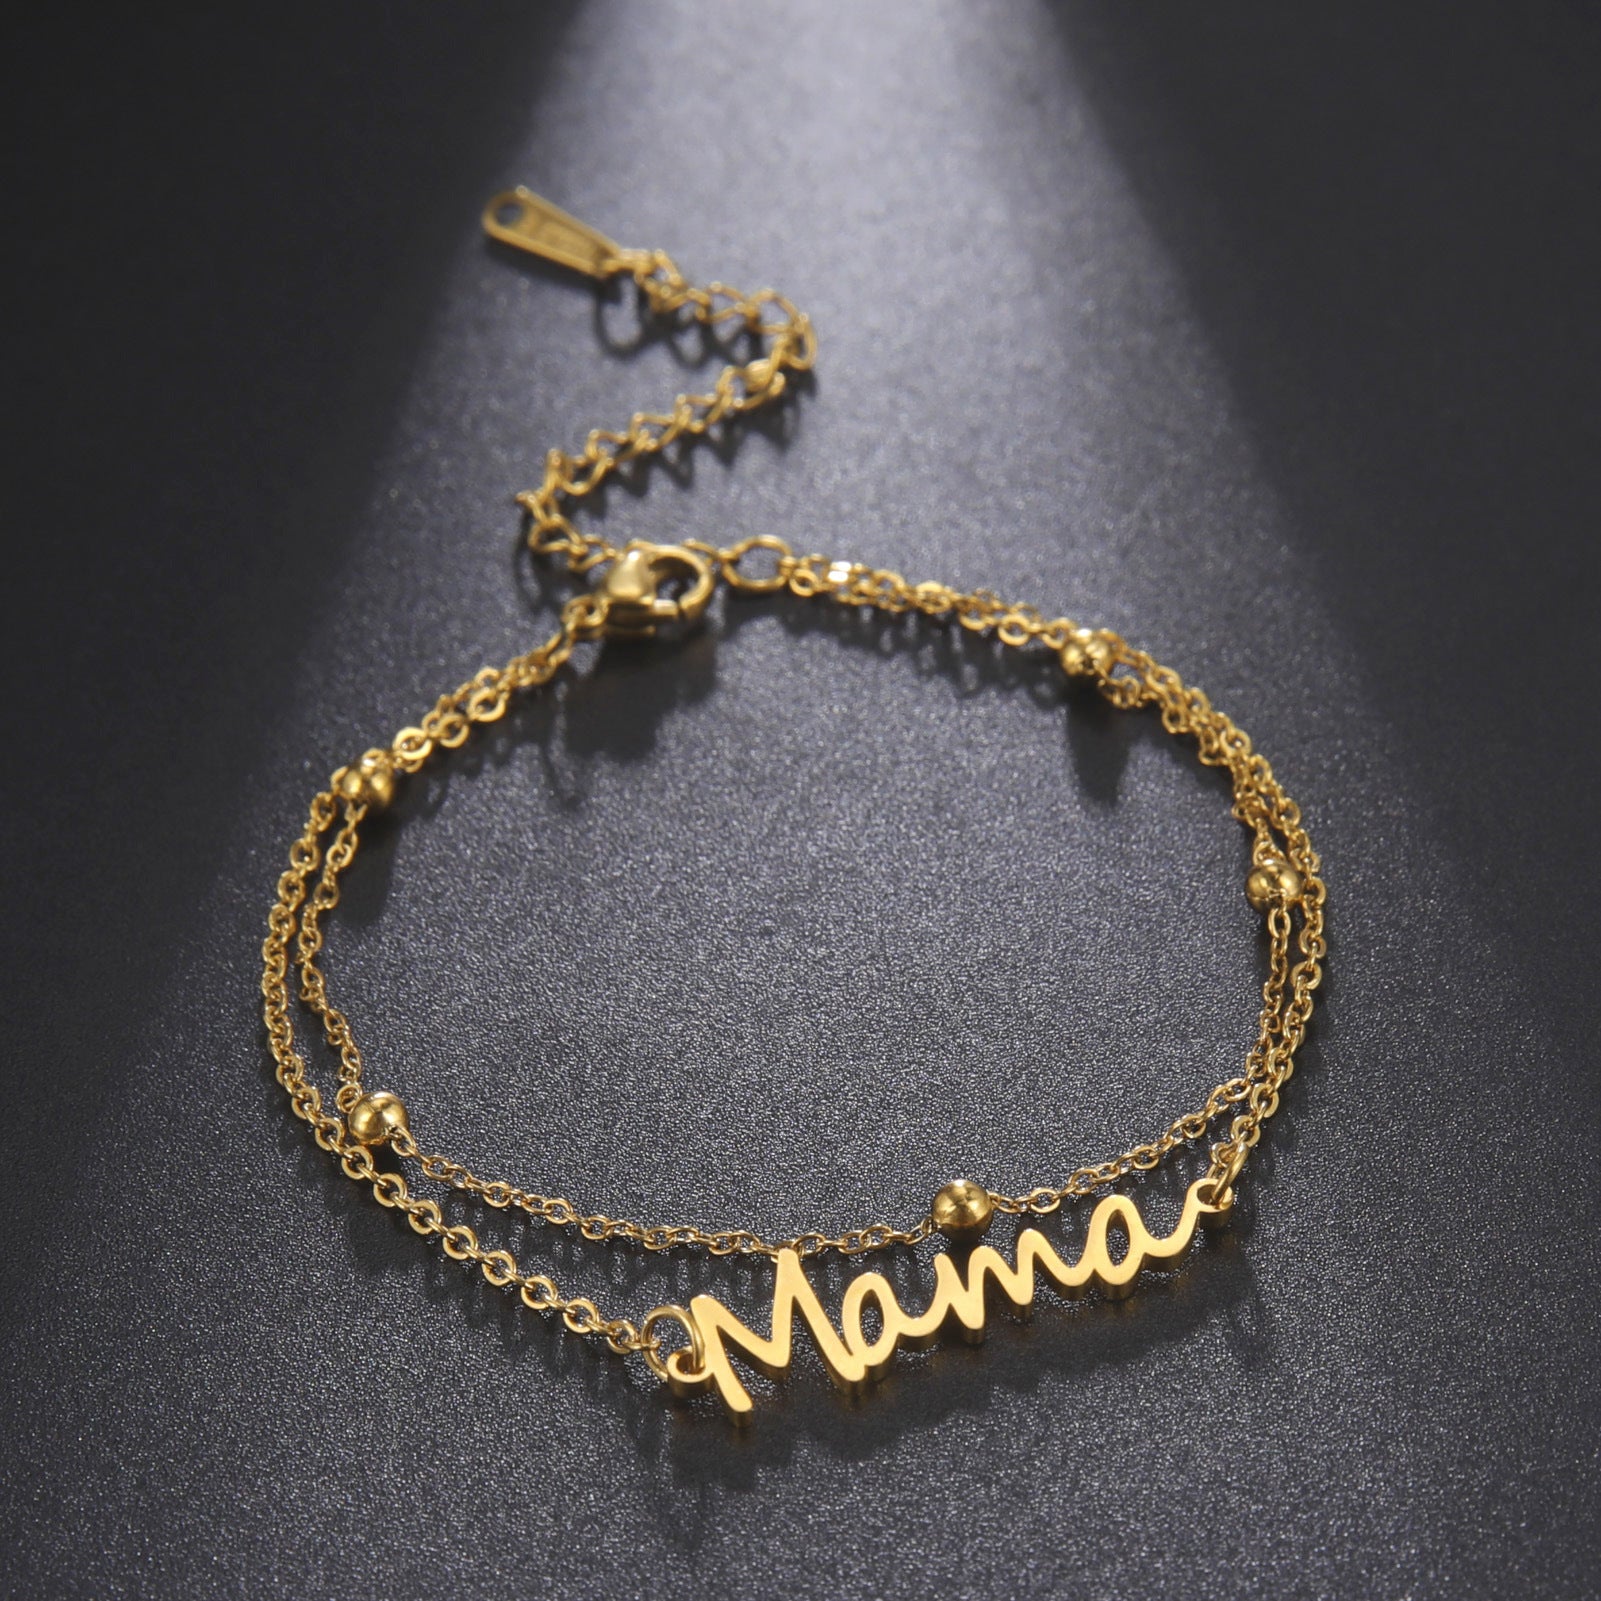 Mama Text Pendant 304 Stainless Steel Double-layer Chain Bracelet